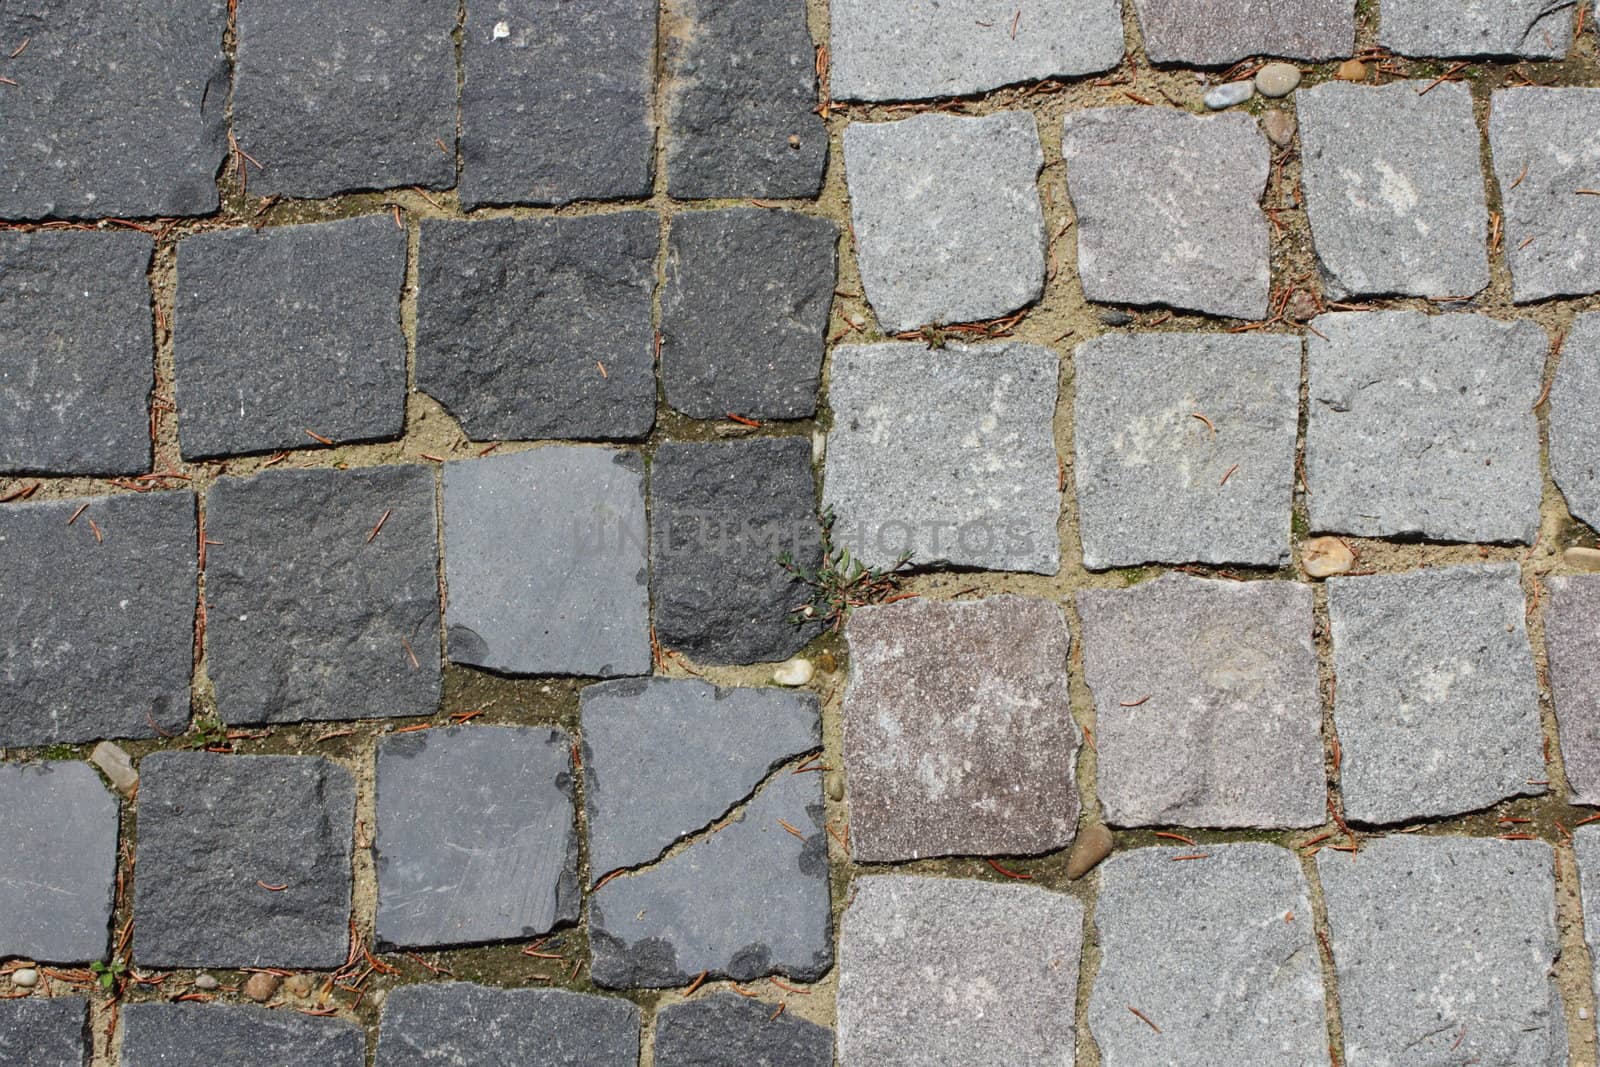 detail of two types of paved stones on a city road